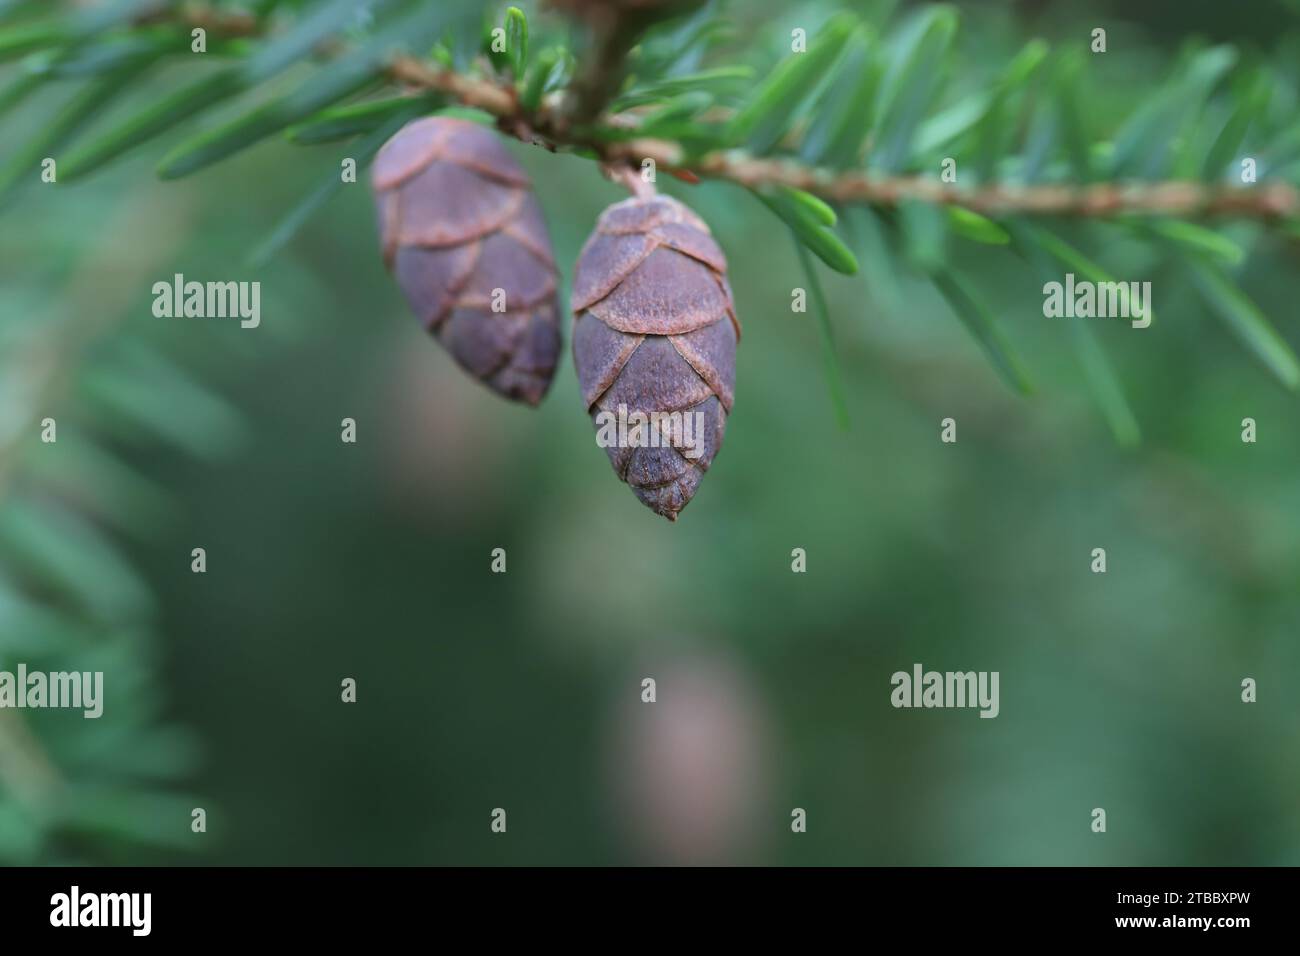 Close-up of two small immature cones of a hemlock tree against a blurred natural background, copy space Stock Photo